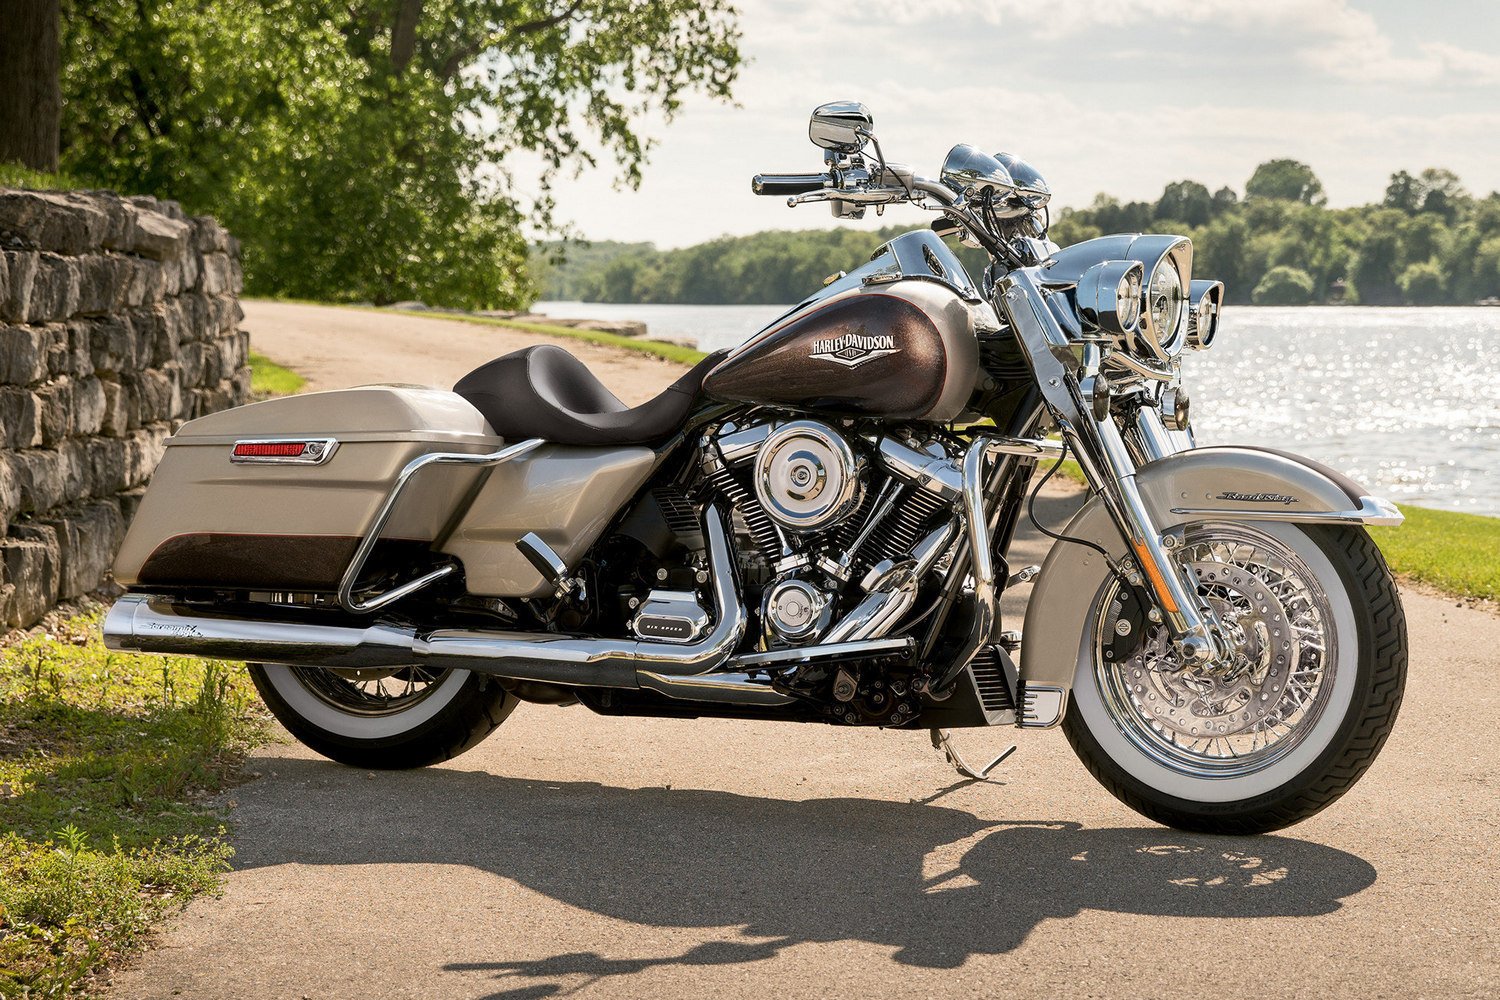 Review of HarleyDavidson Road King 2018 pictures, live photos